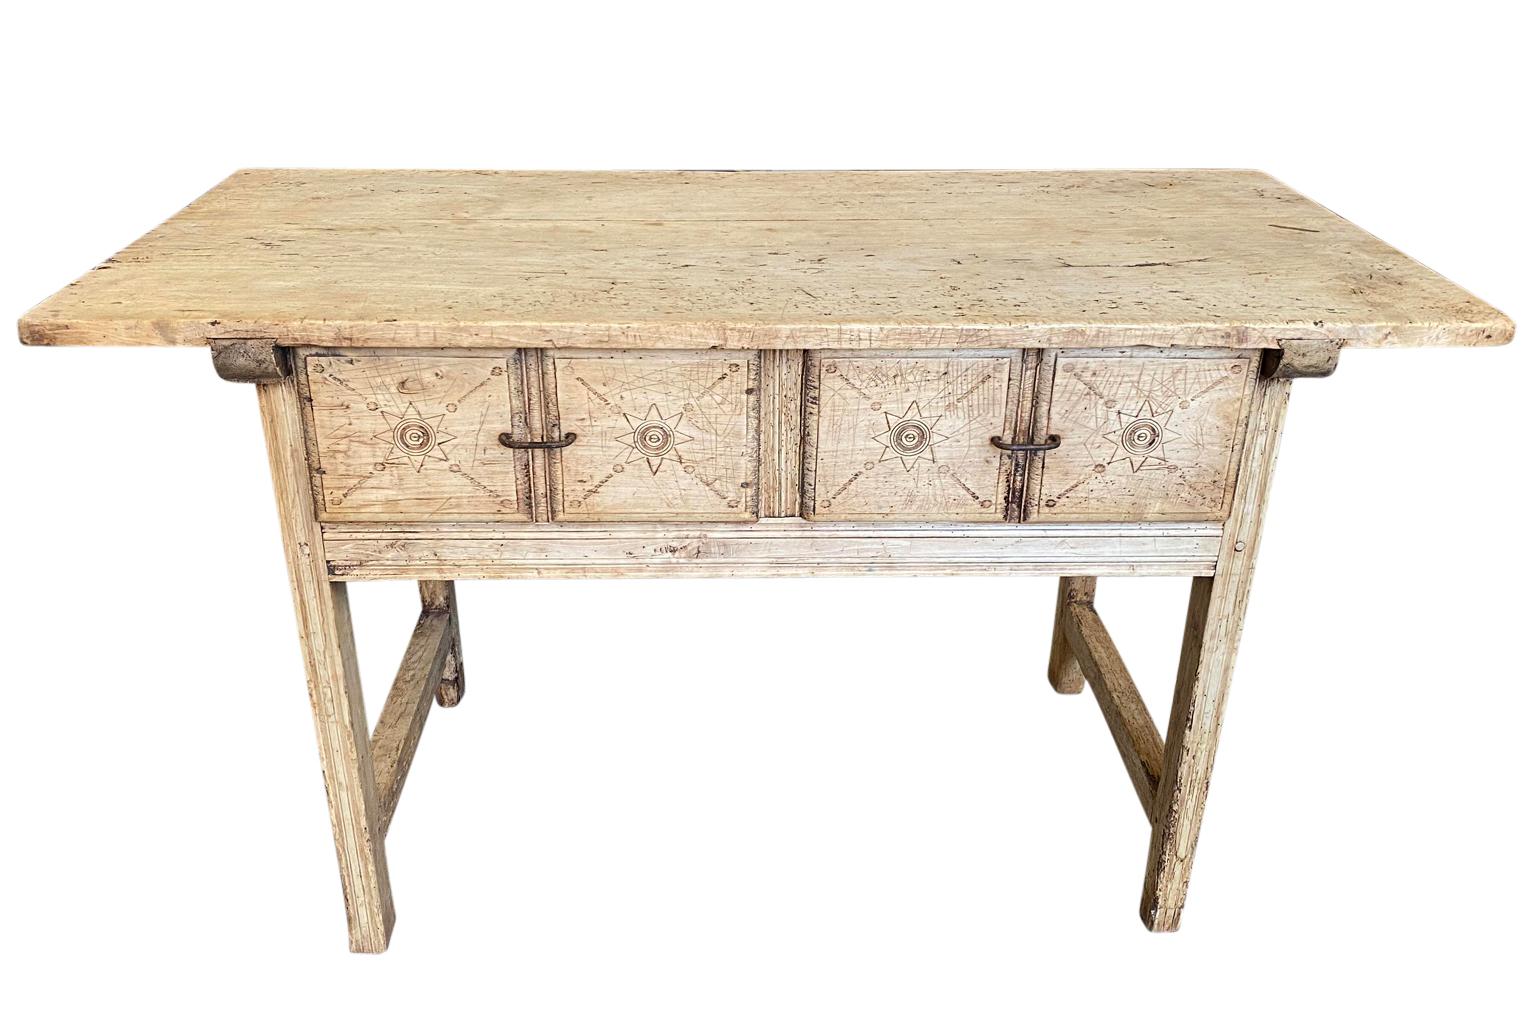 A very striking 18th century primitive Spanish console. Beautifully constructed from naturally washed poplar with two drawers, each with nicely carved facsias and interesting drawer pulls and a solid board top. Wonderful patina.